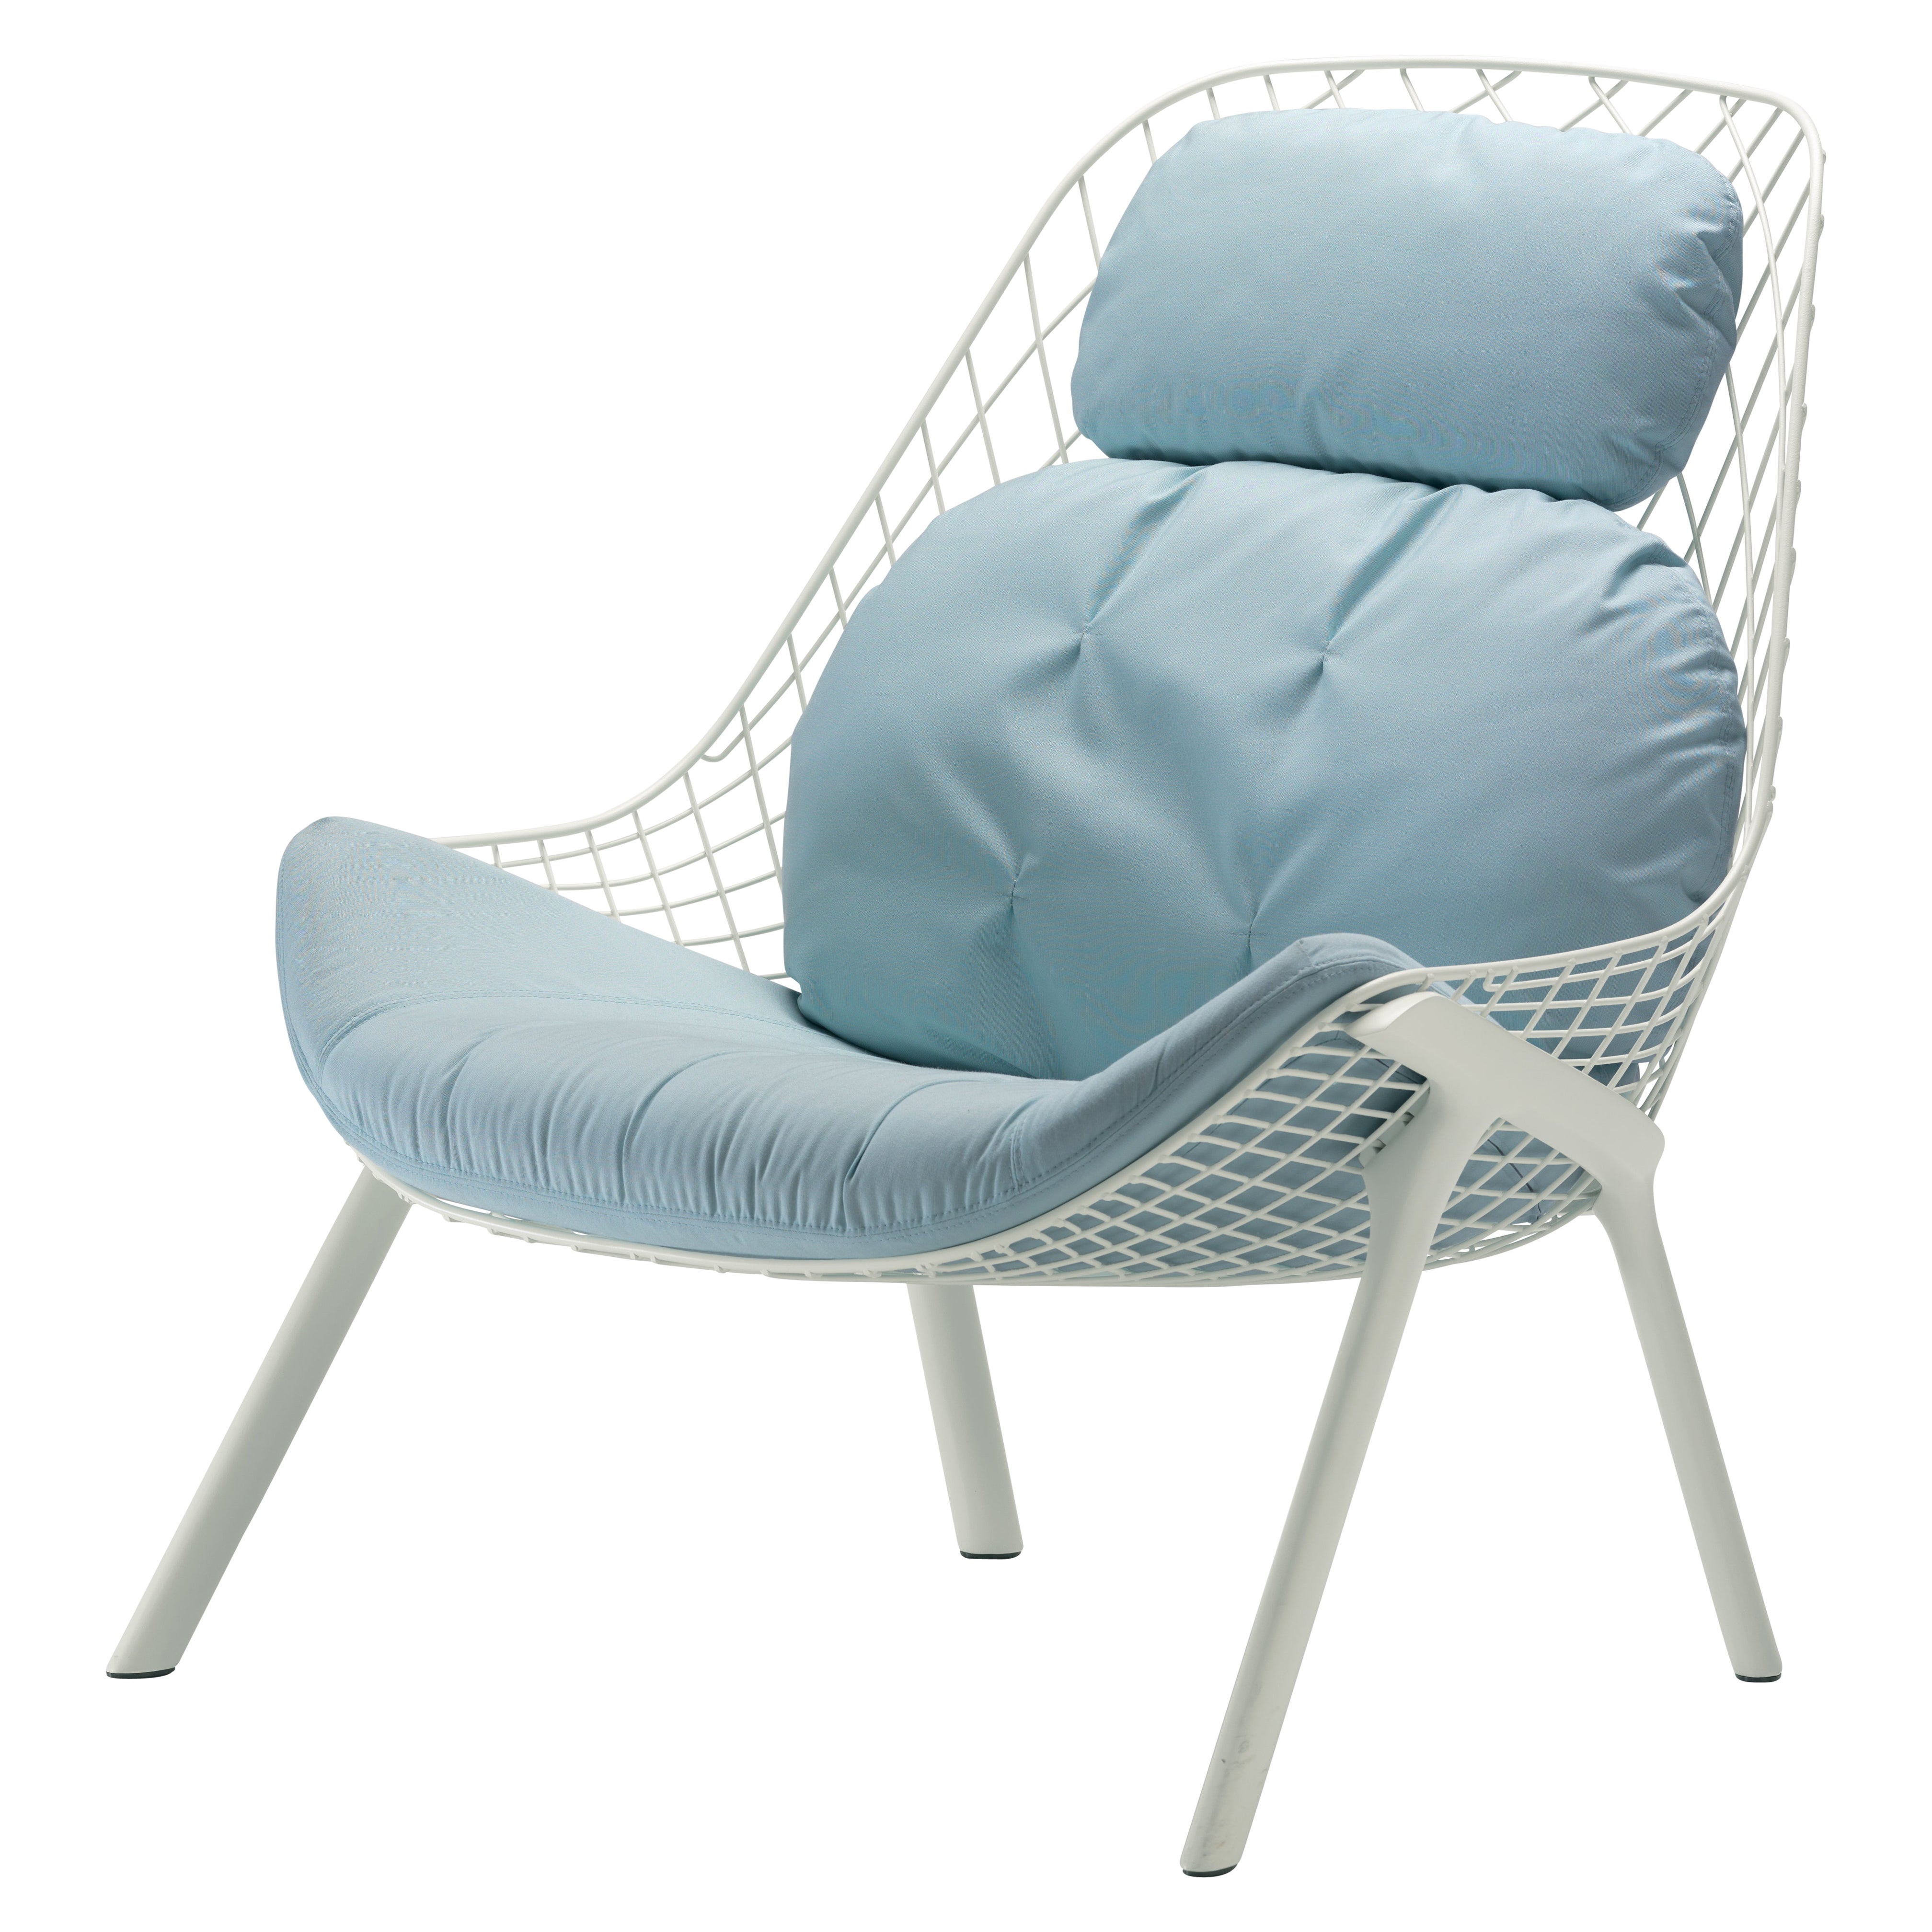 Alias 035 Gran Kobi Outdoor Armchair with Pad and White Lacquered Aluminum Frame